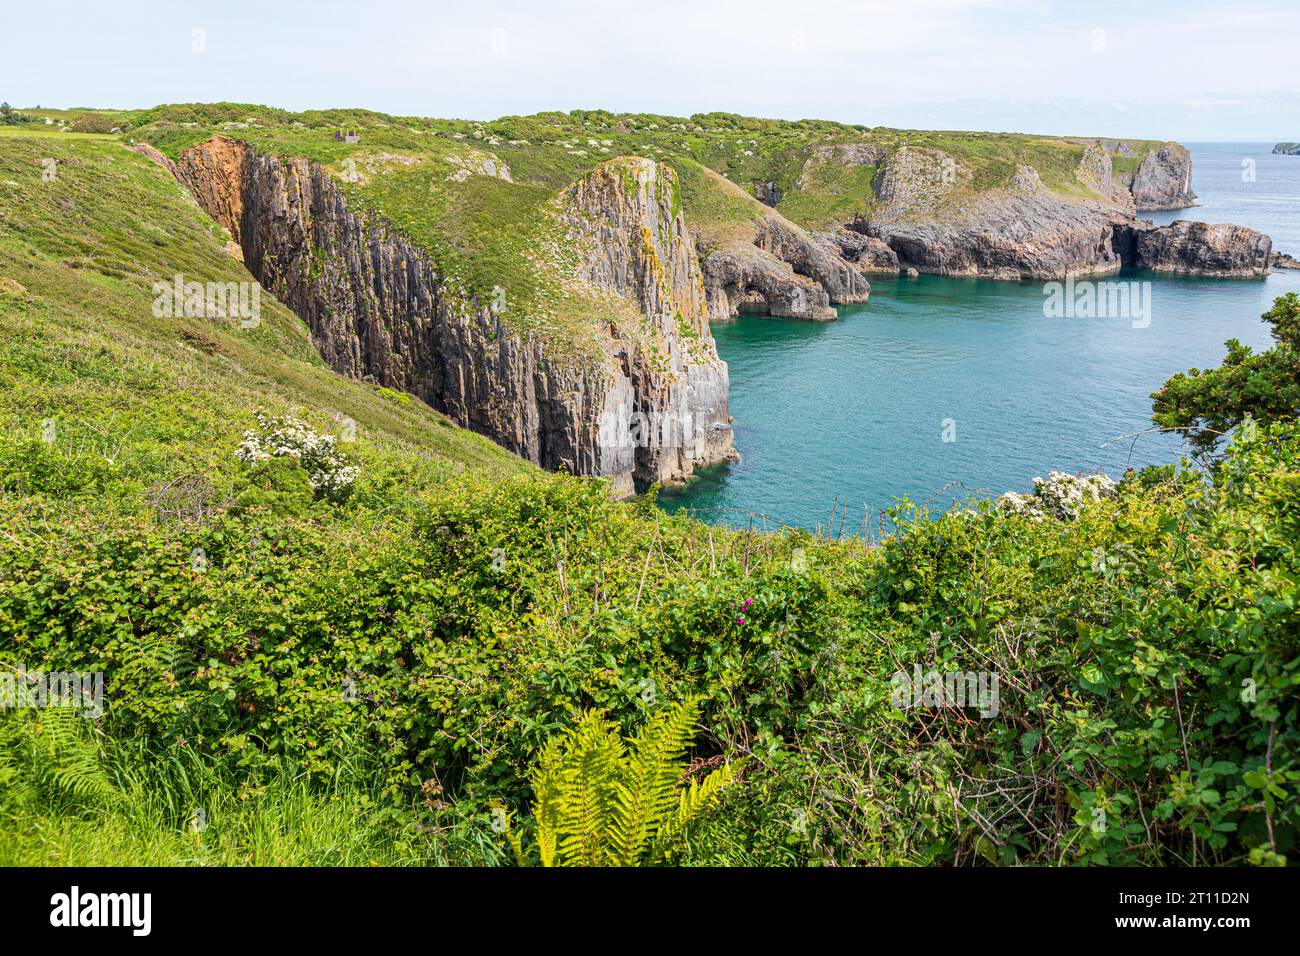 The view of the cliffs towards Lydstep Point from Skrinkle Haven, Lydstep in the Pembrokeshire Coast National Park, West Wales UK Stock Photo